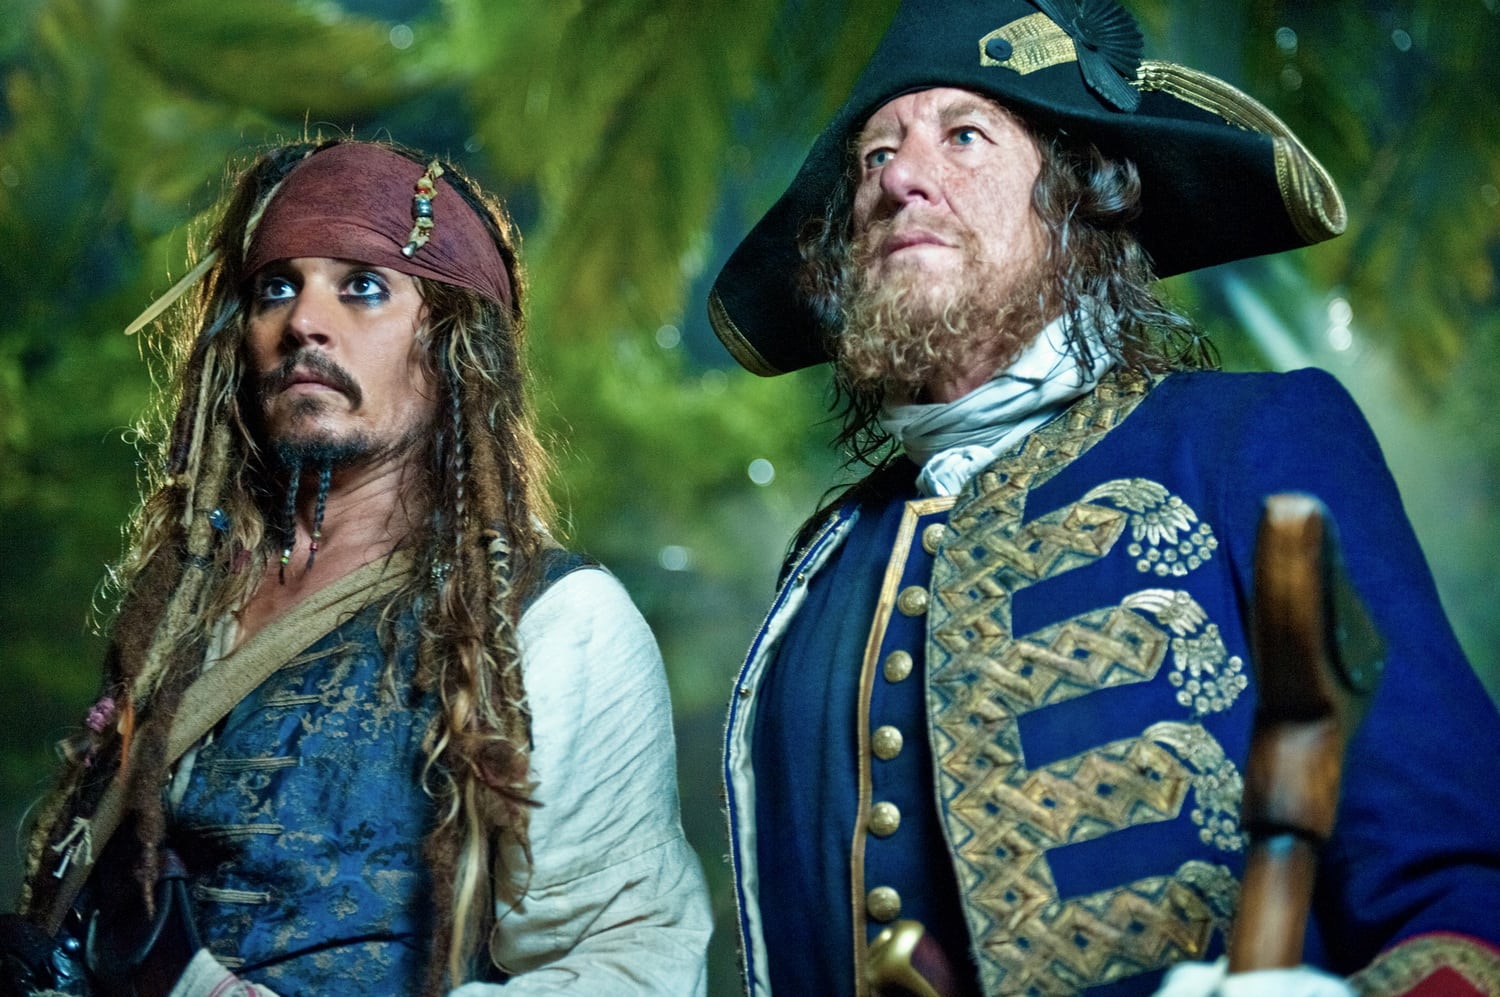 "PIRATES OF THE CARIBBEAN: ON STRANGER TIDES" Captain Jack Sparrow (JOHNNY DEPP) and his old nemesis Captain Barbossa (GEOFFREY RUSH) are thrown together by fate in the search for the Fountain of Youth. Ph: Peter Mountain ©Disney Enterprises, Inc. All Rights Reserved.